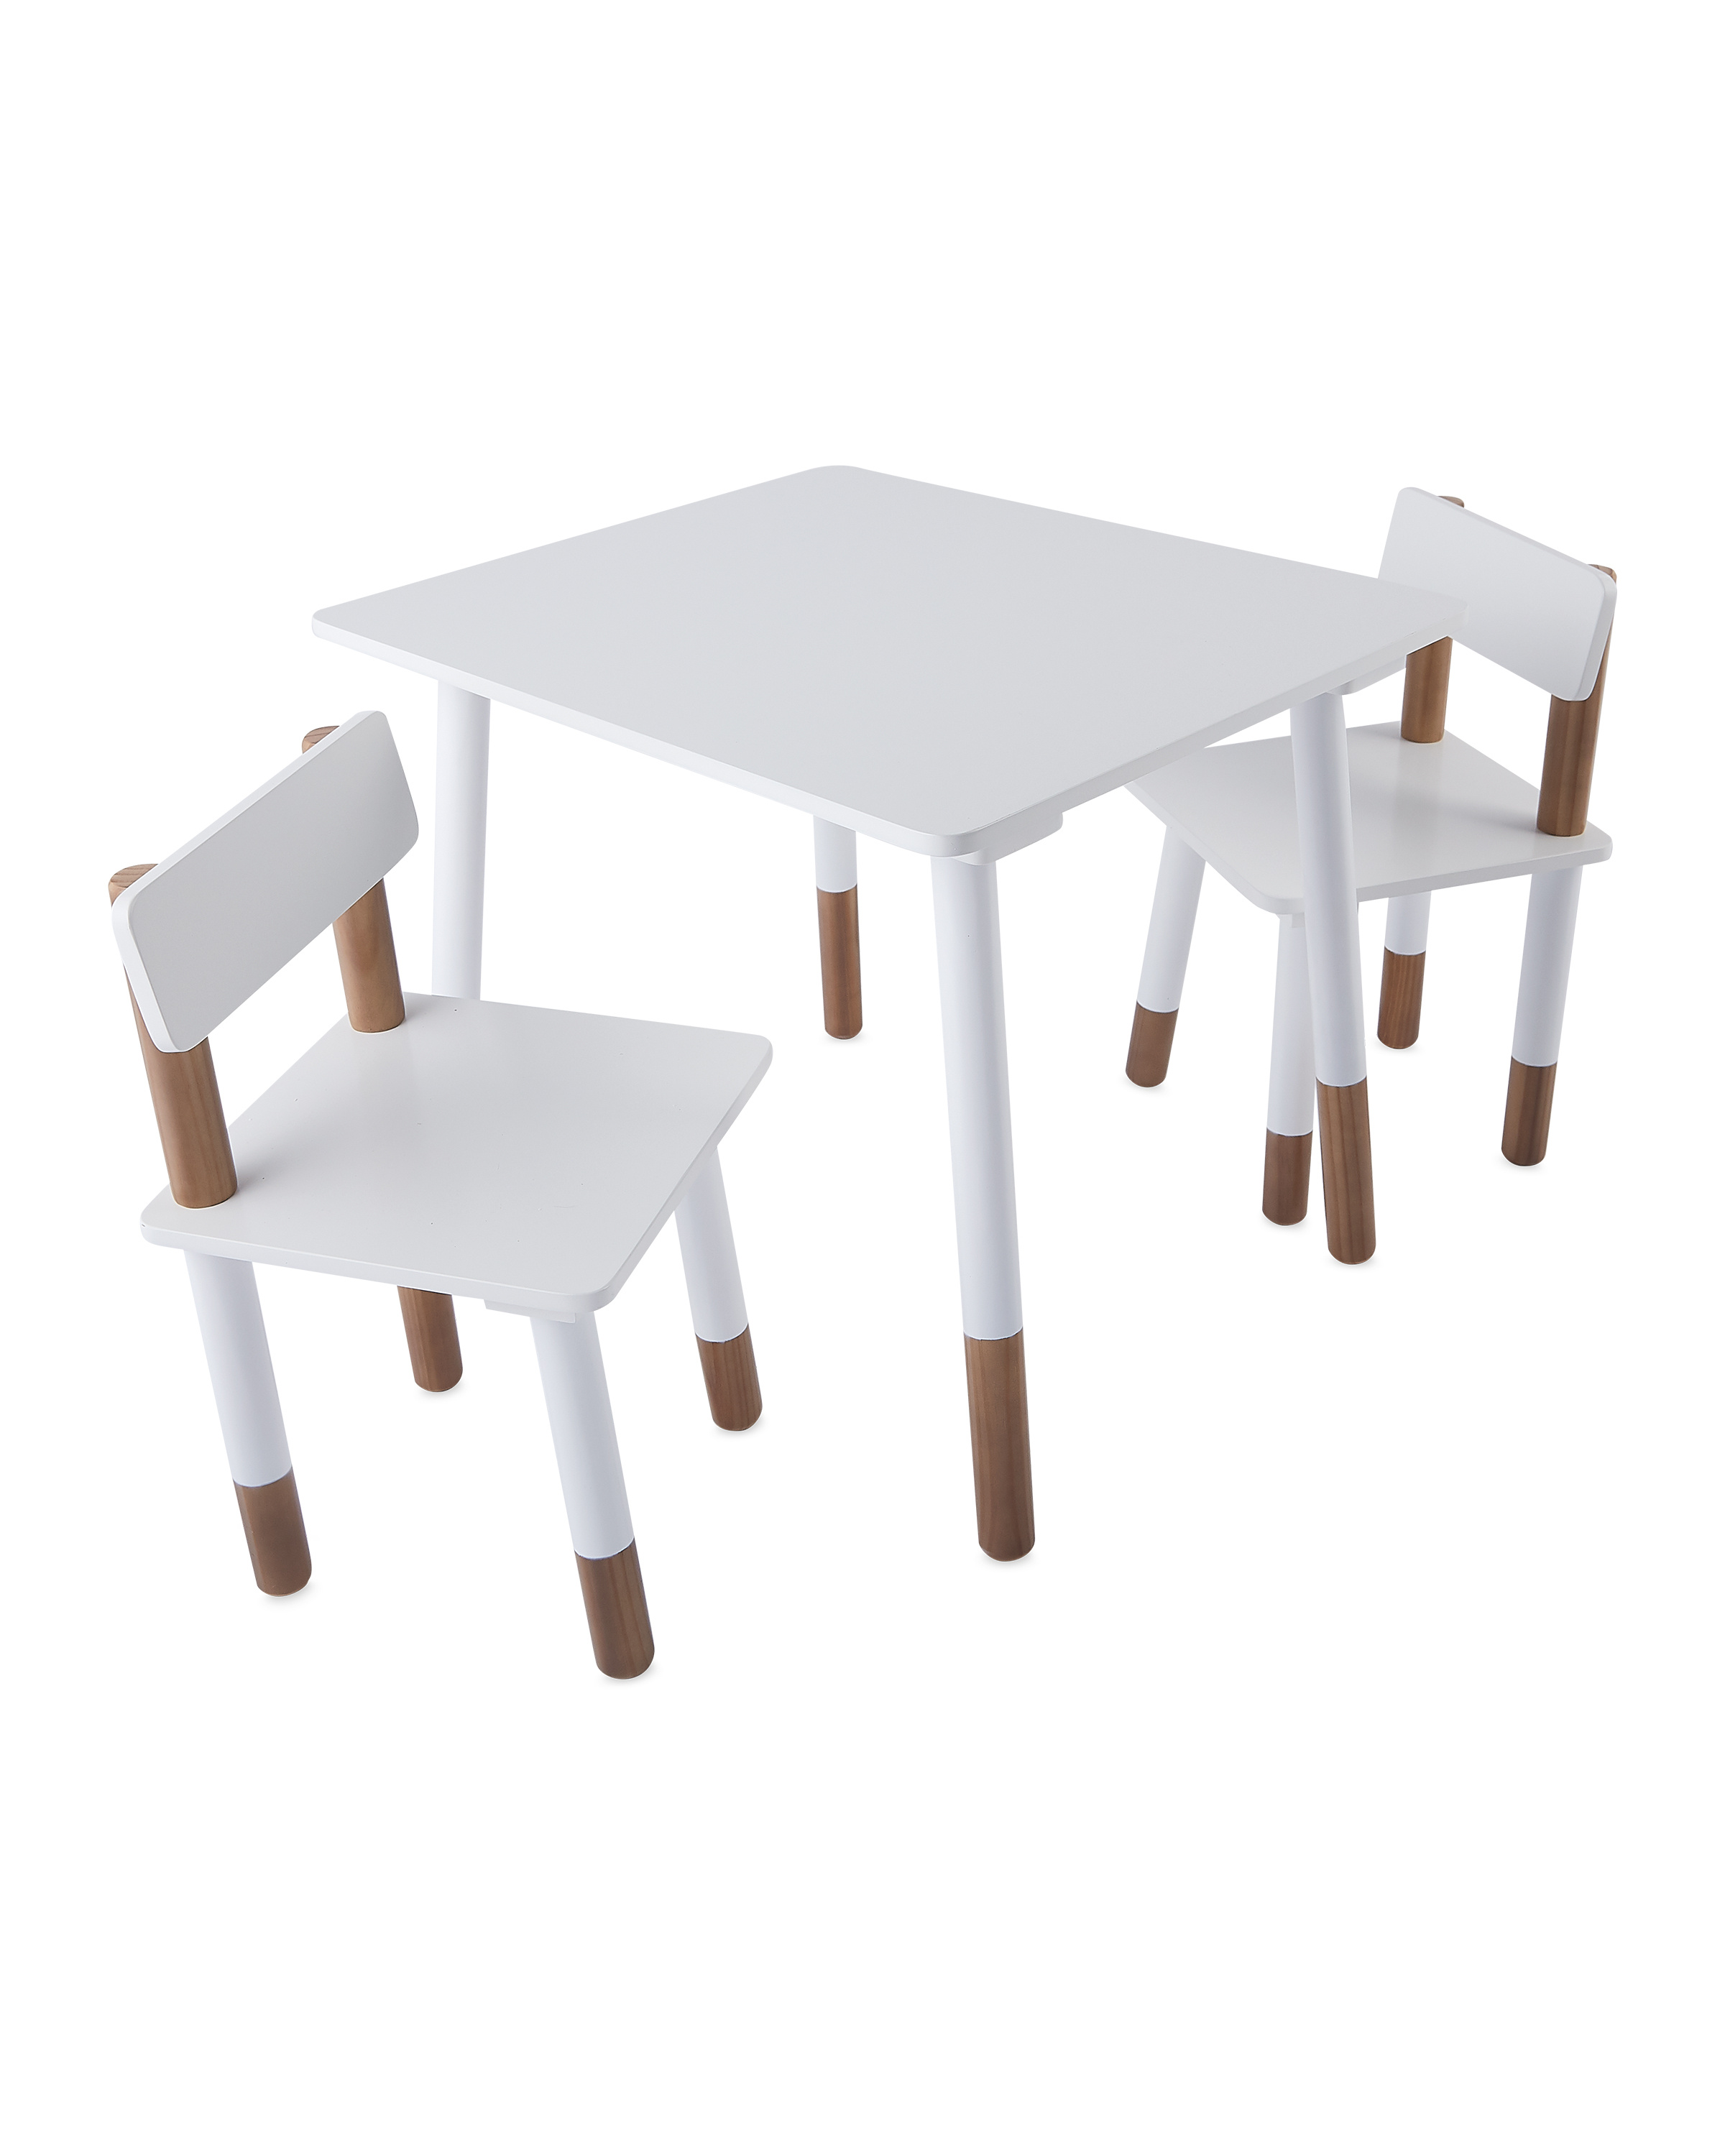 Children S White Table Chairs Set, Childs Wooden Table And Chairs Uk